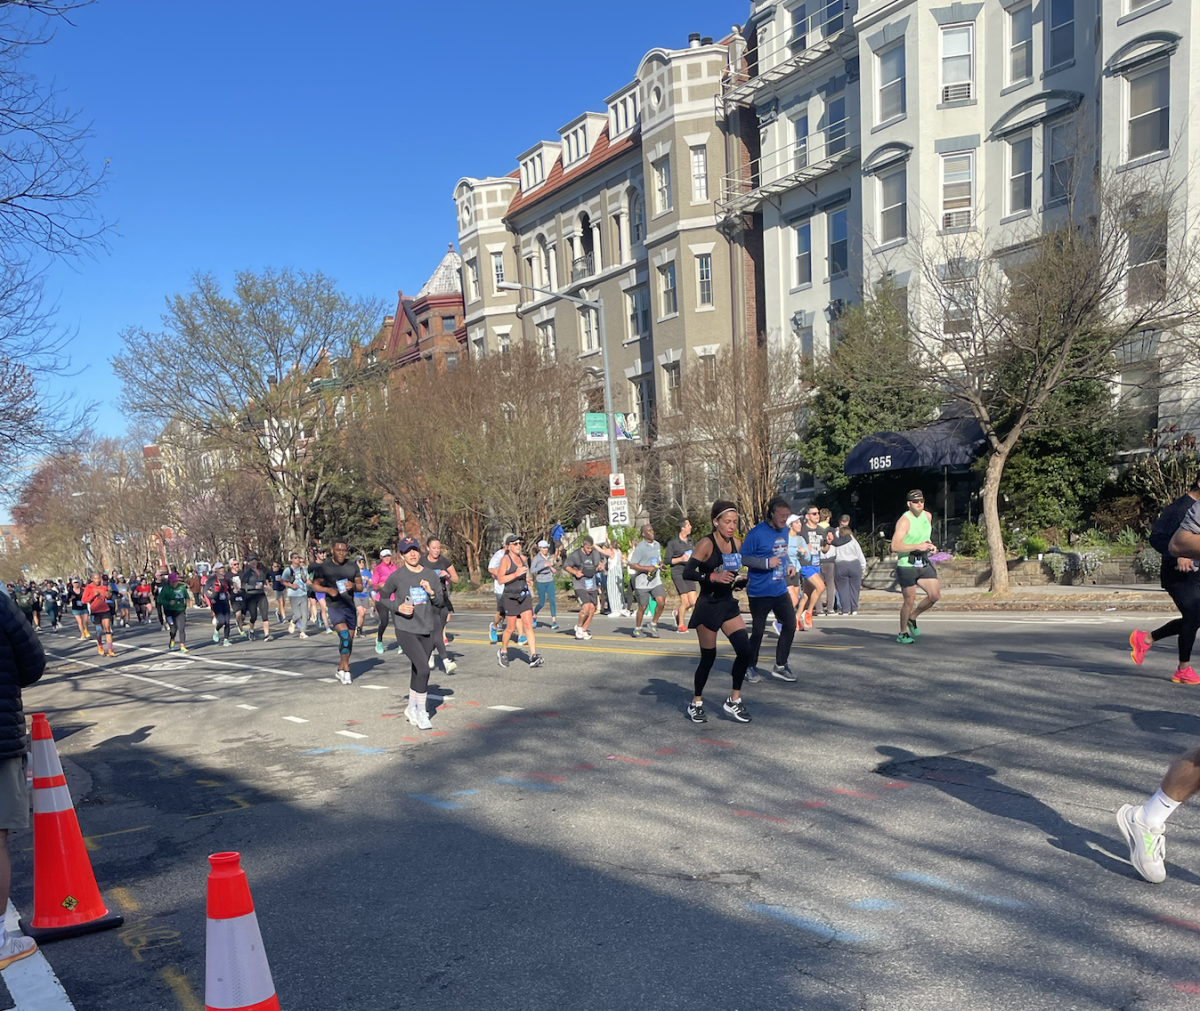 Runners from across the country, including Georgetown University students, packed the streets of Washington, D.C. to run, walk and everything in between at the St. Jude Rock ‘n’ Roll Half Marathon and 5K the morning of March 16.
